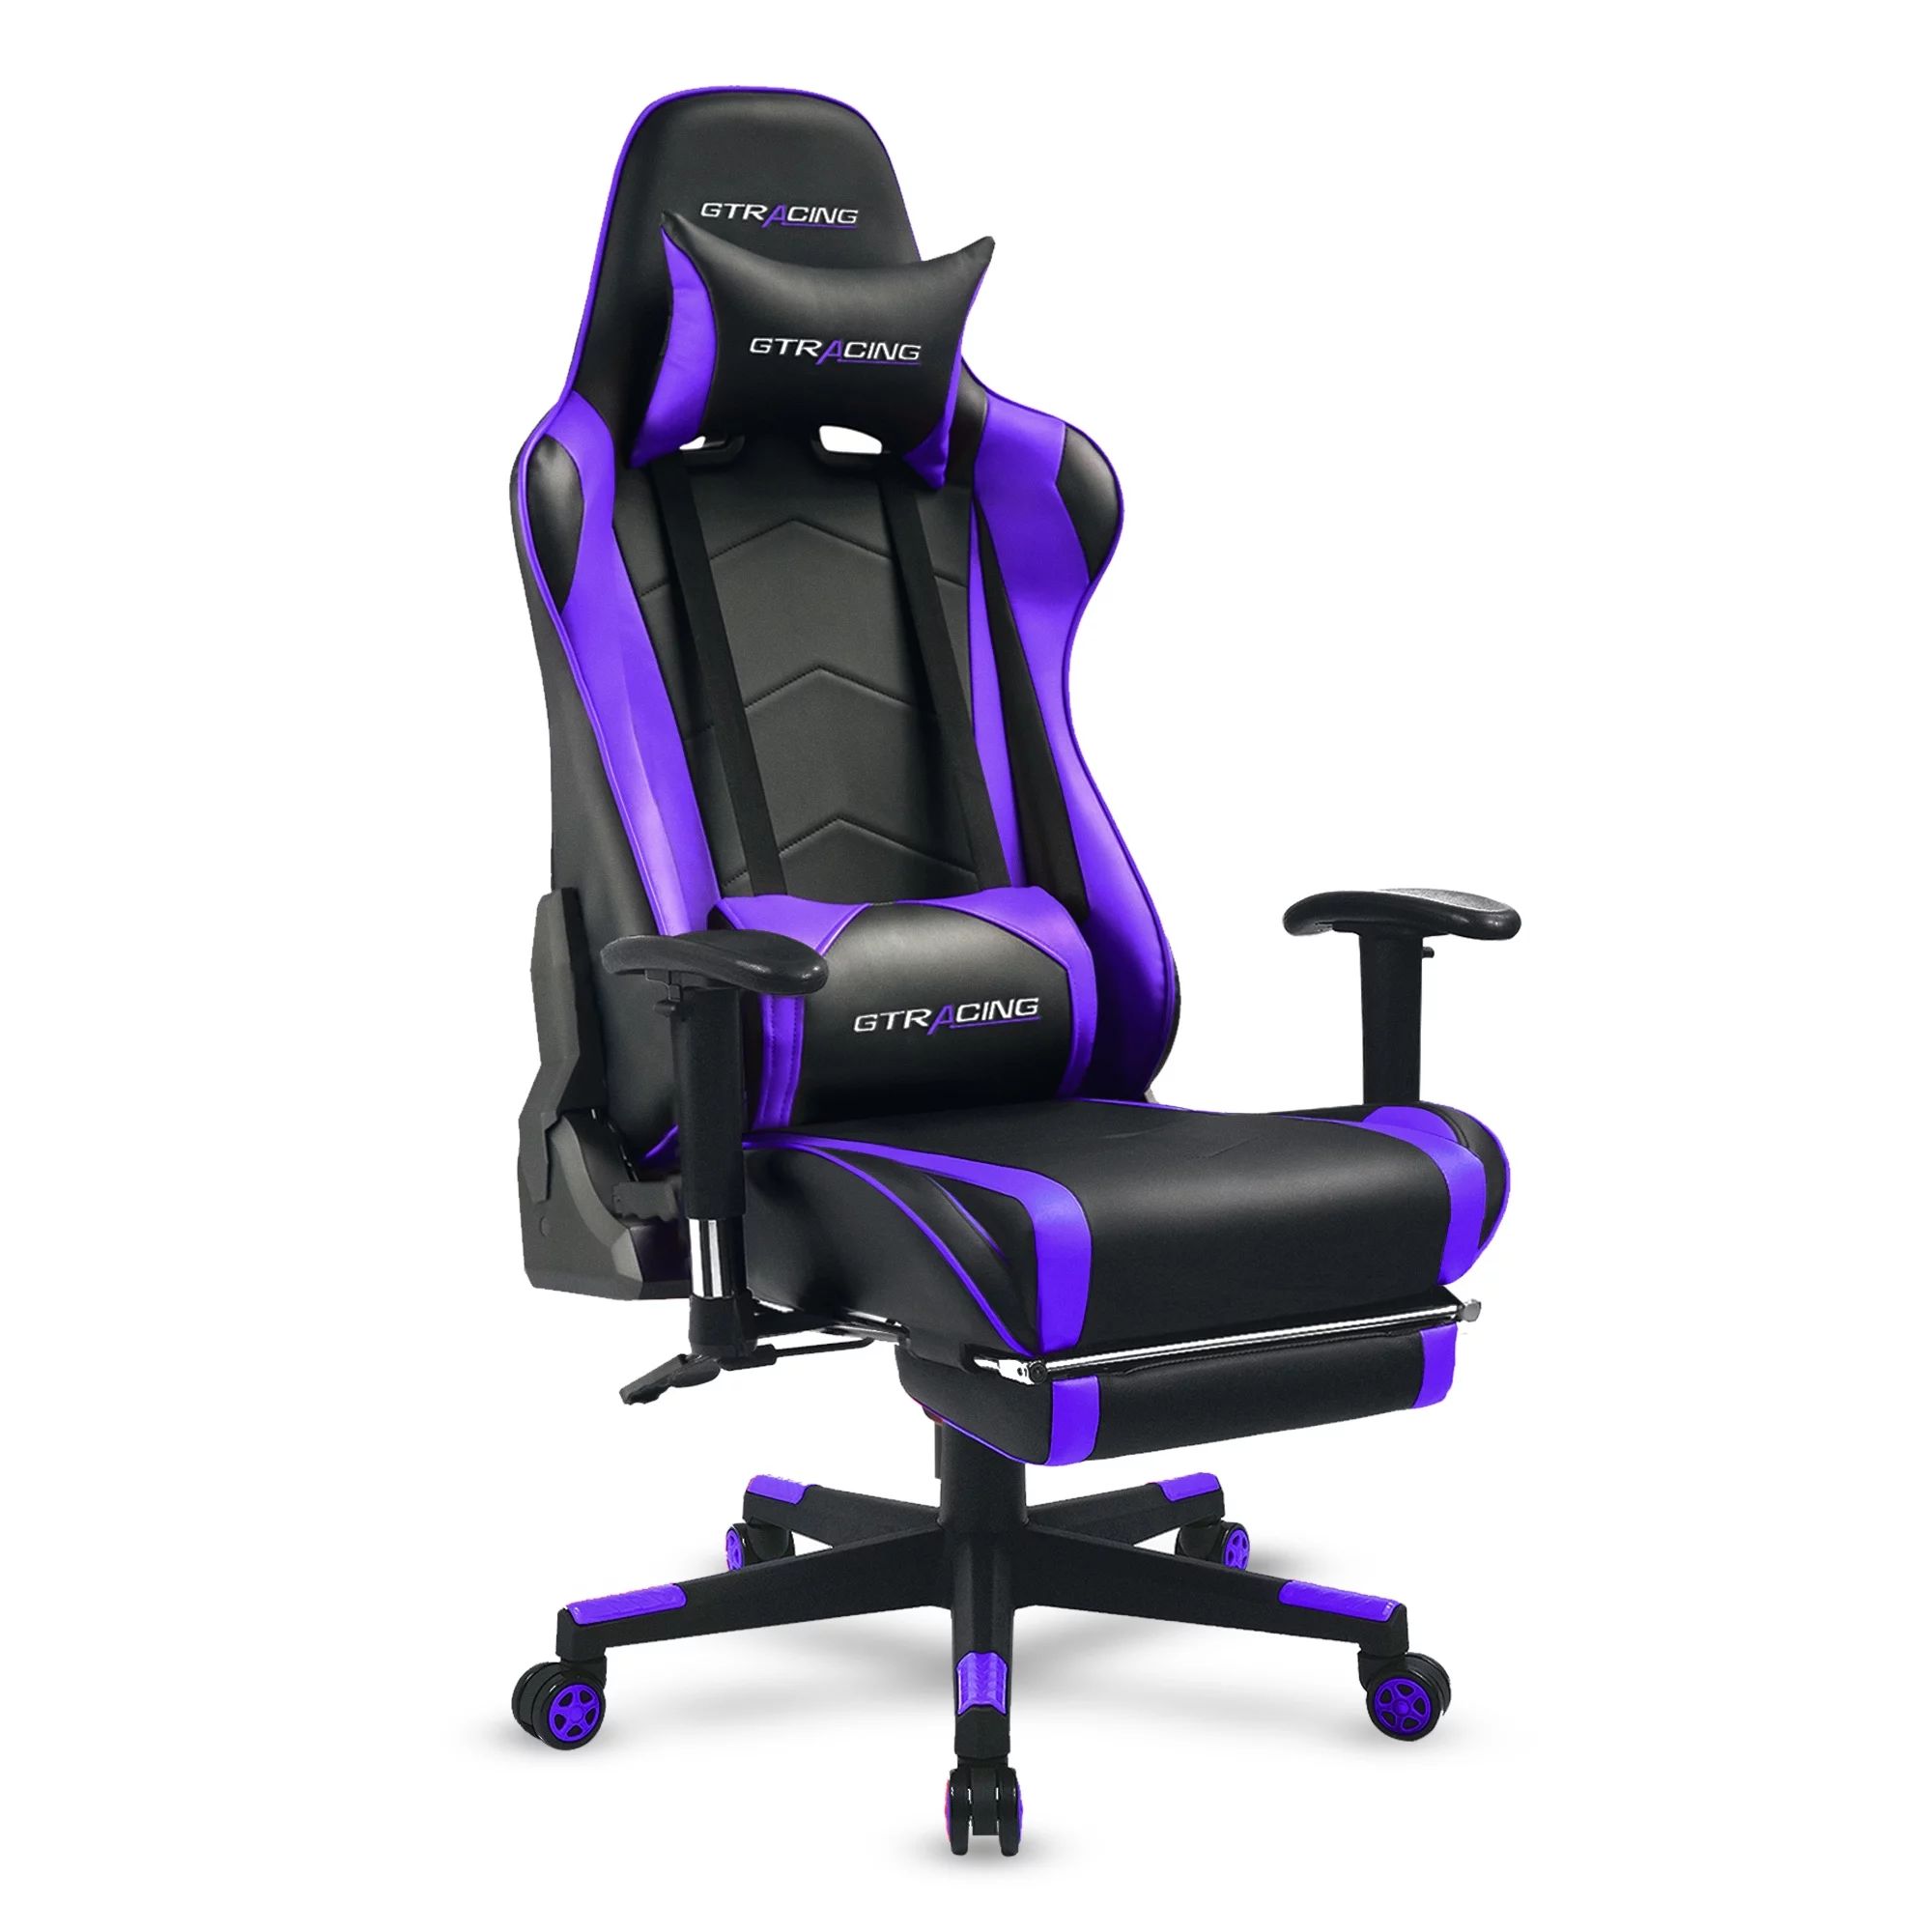 GTRACING Gaming Chair with Footrest PU Leather Office Chair with Adjustable Headrest, Purple | Walmart (US)